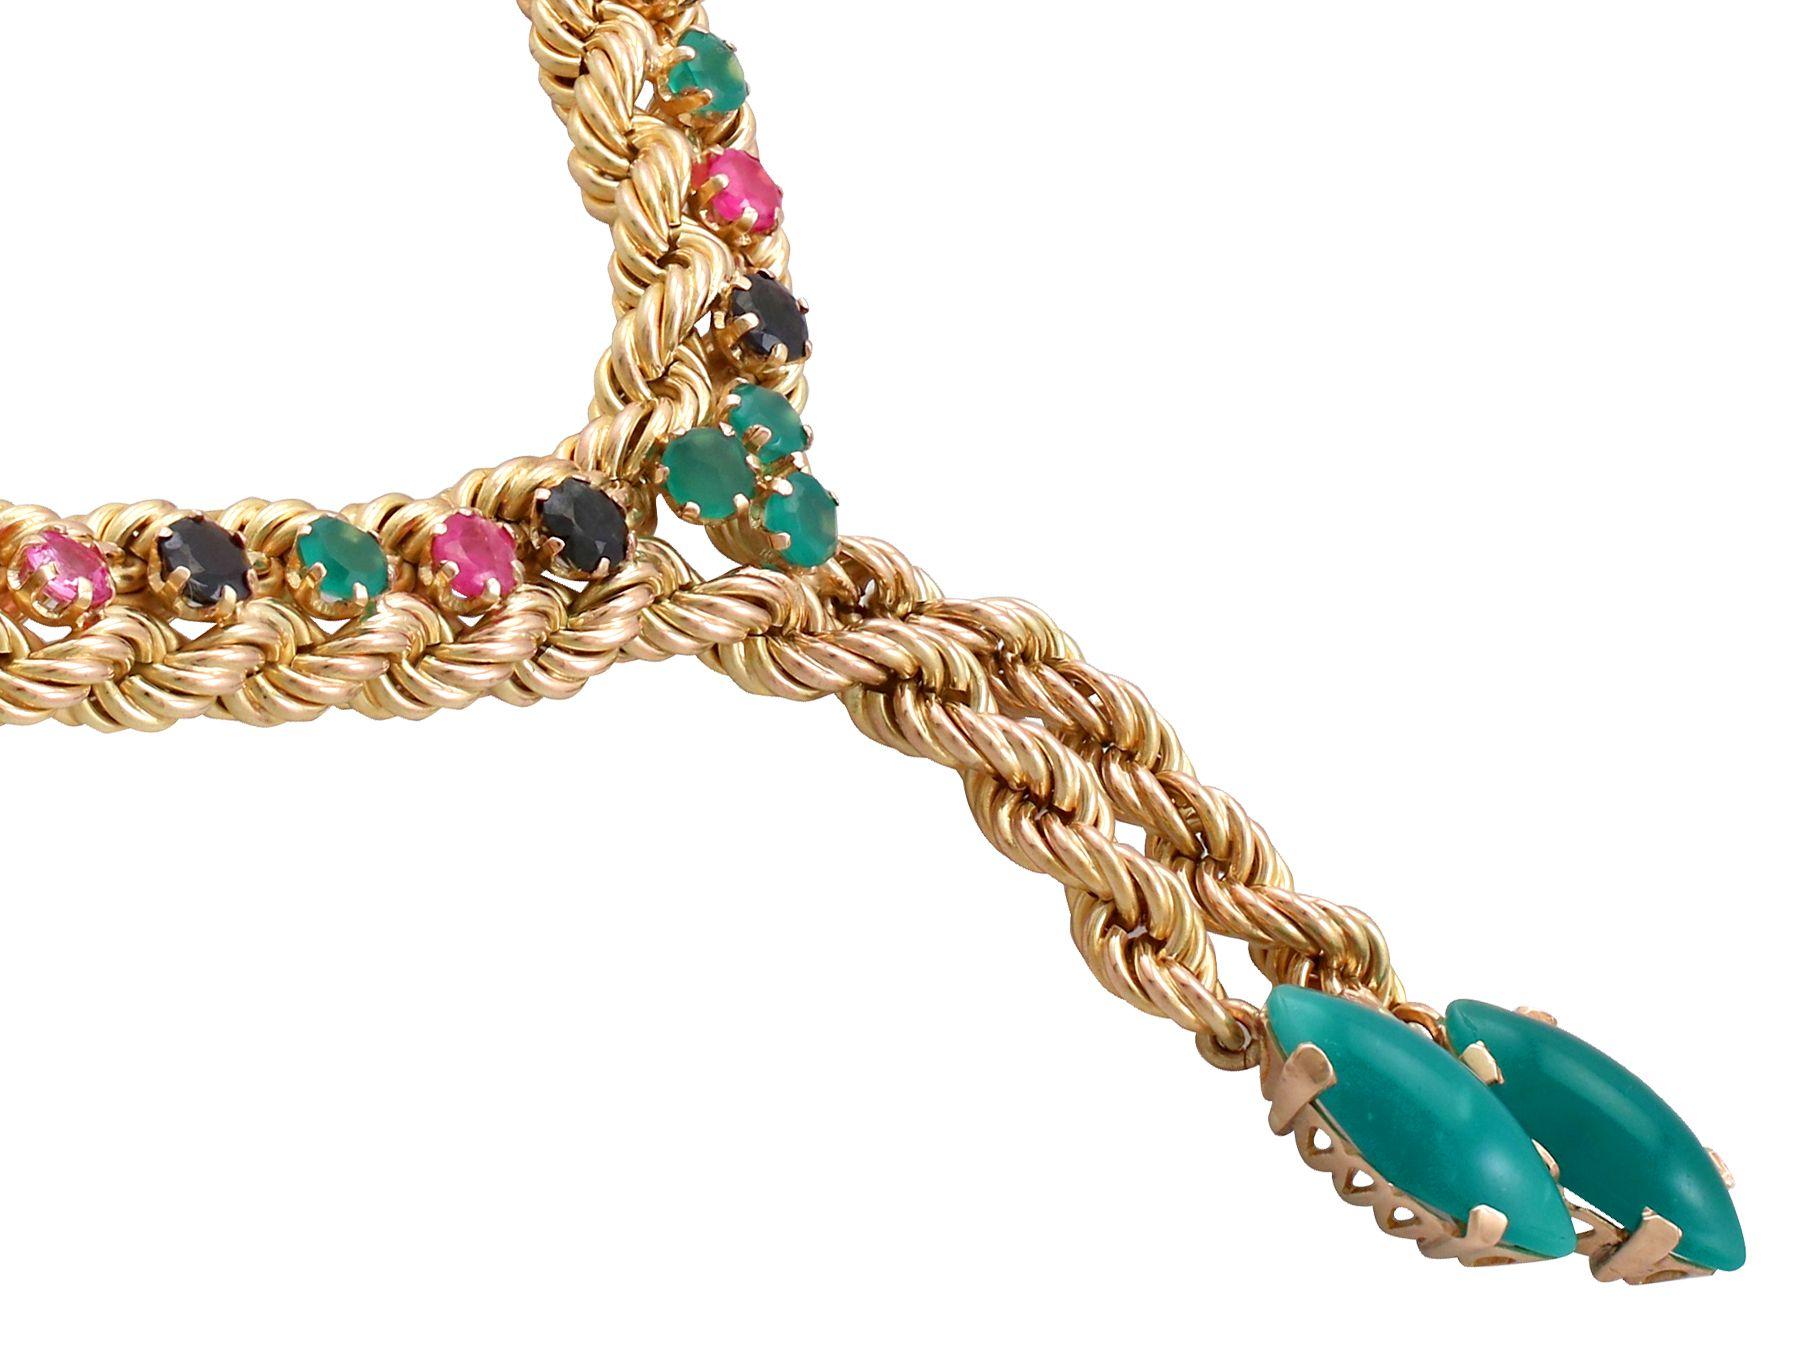 An impressive European 4.5 carat ruby, 4.18 carat sapphire, 9.02 carat chrysoprase and 14 karat yellow gold necklace; part of our diverse gemstone jewelry collections.

This fine and impressive gemstone rope chain necklace has been crafted in 14k